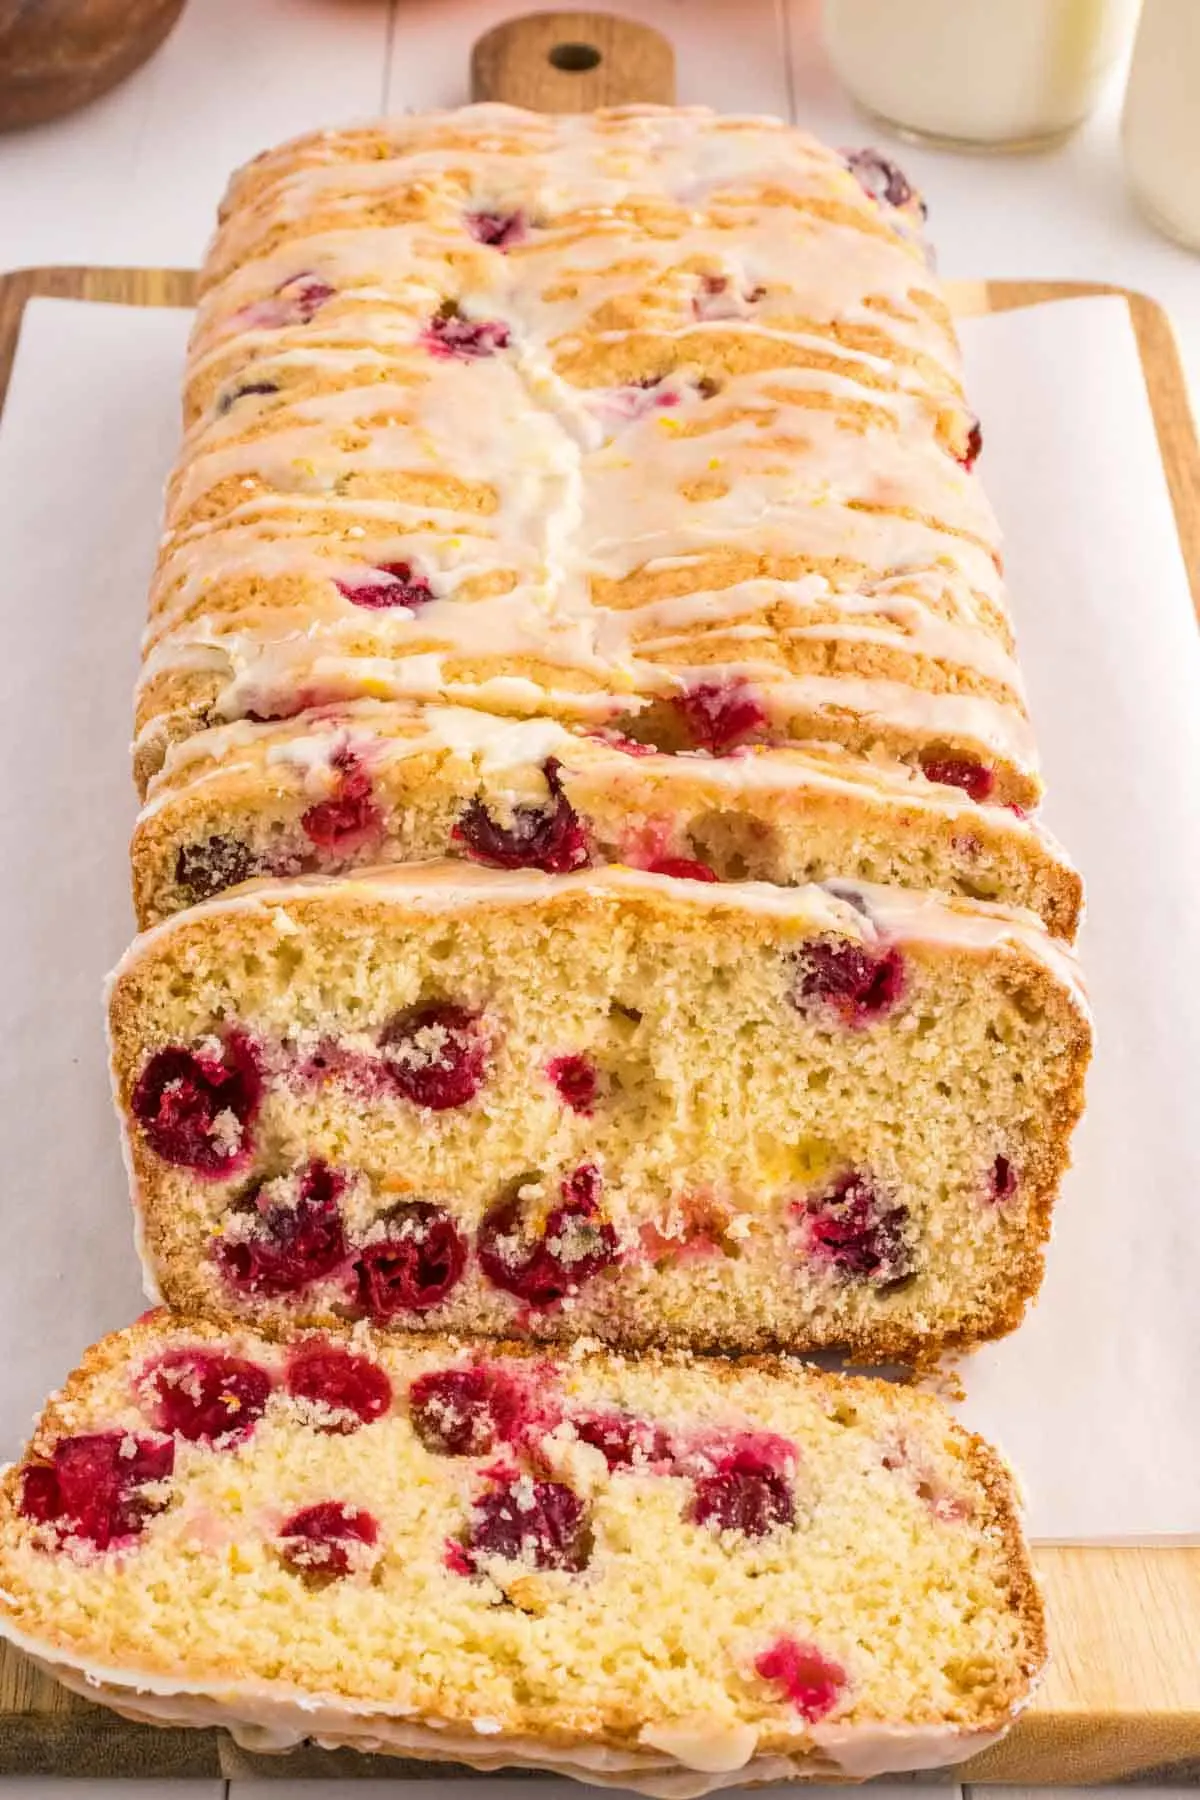 Cranberry Orange Bread is a delicious treat that combines the tartness of cranberries with the citrusy brightness of oranges.